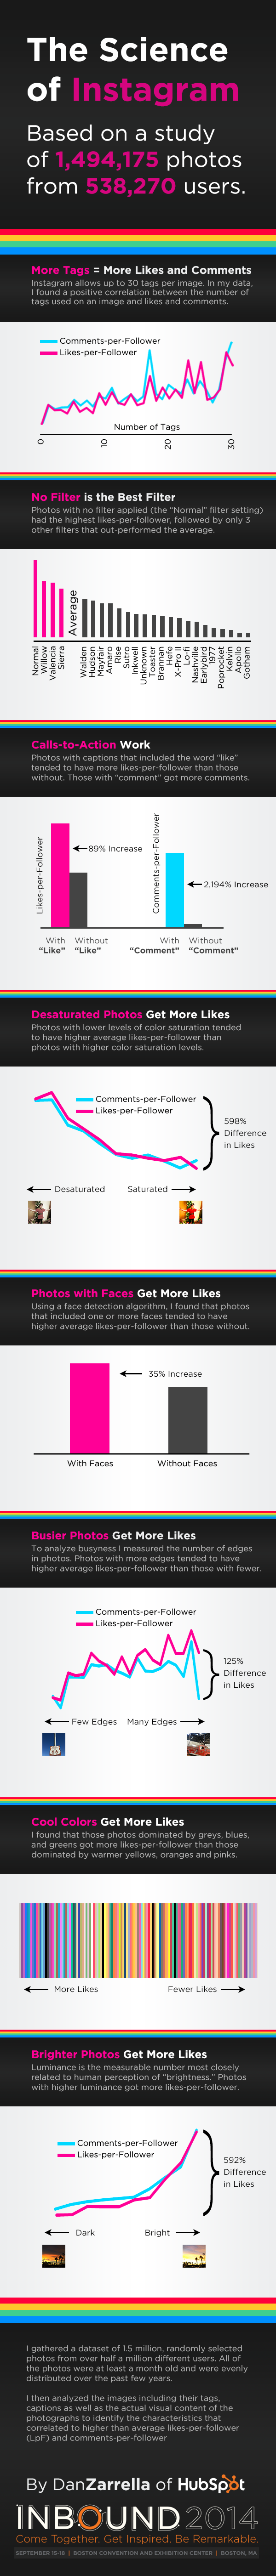 The Science of Instagram infographic